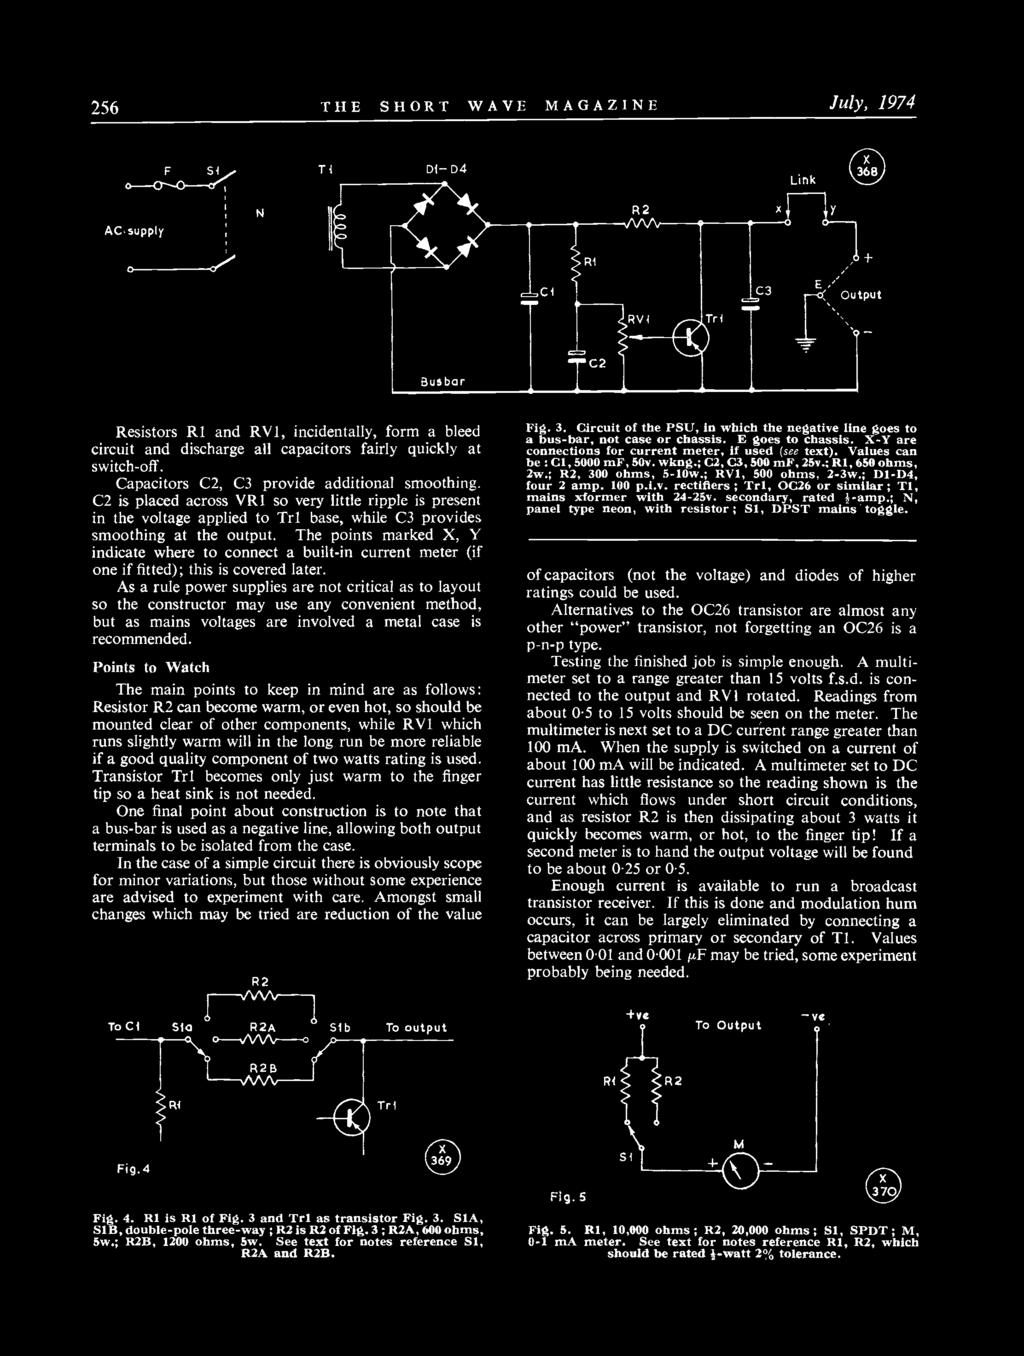 256 THE SHORT WAVE MAGAZINE July, 1974 Resistors R1 and RV1, incidentally, form a bleed circuit and discharge all capacitors fairly quickly at switch -off.